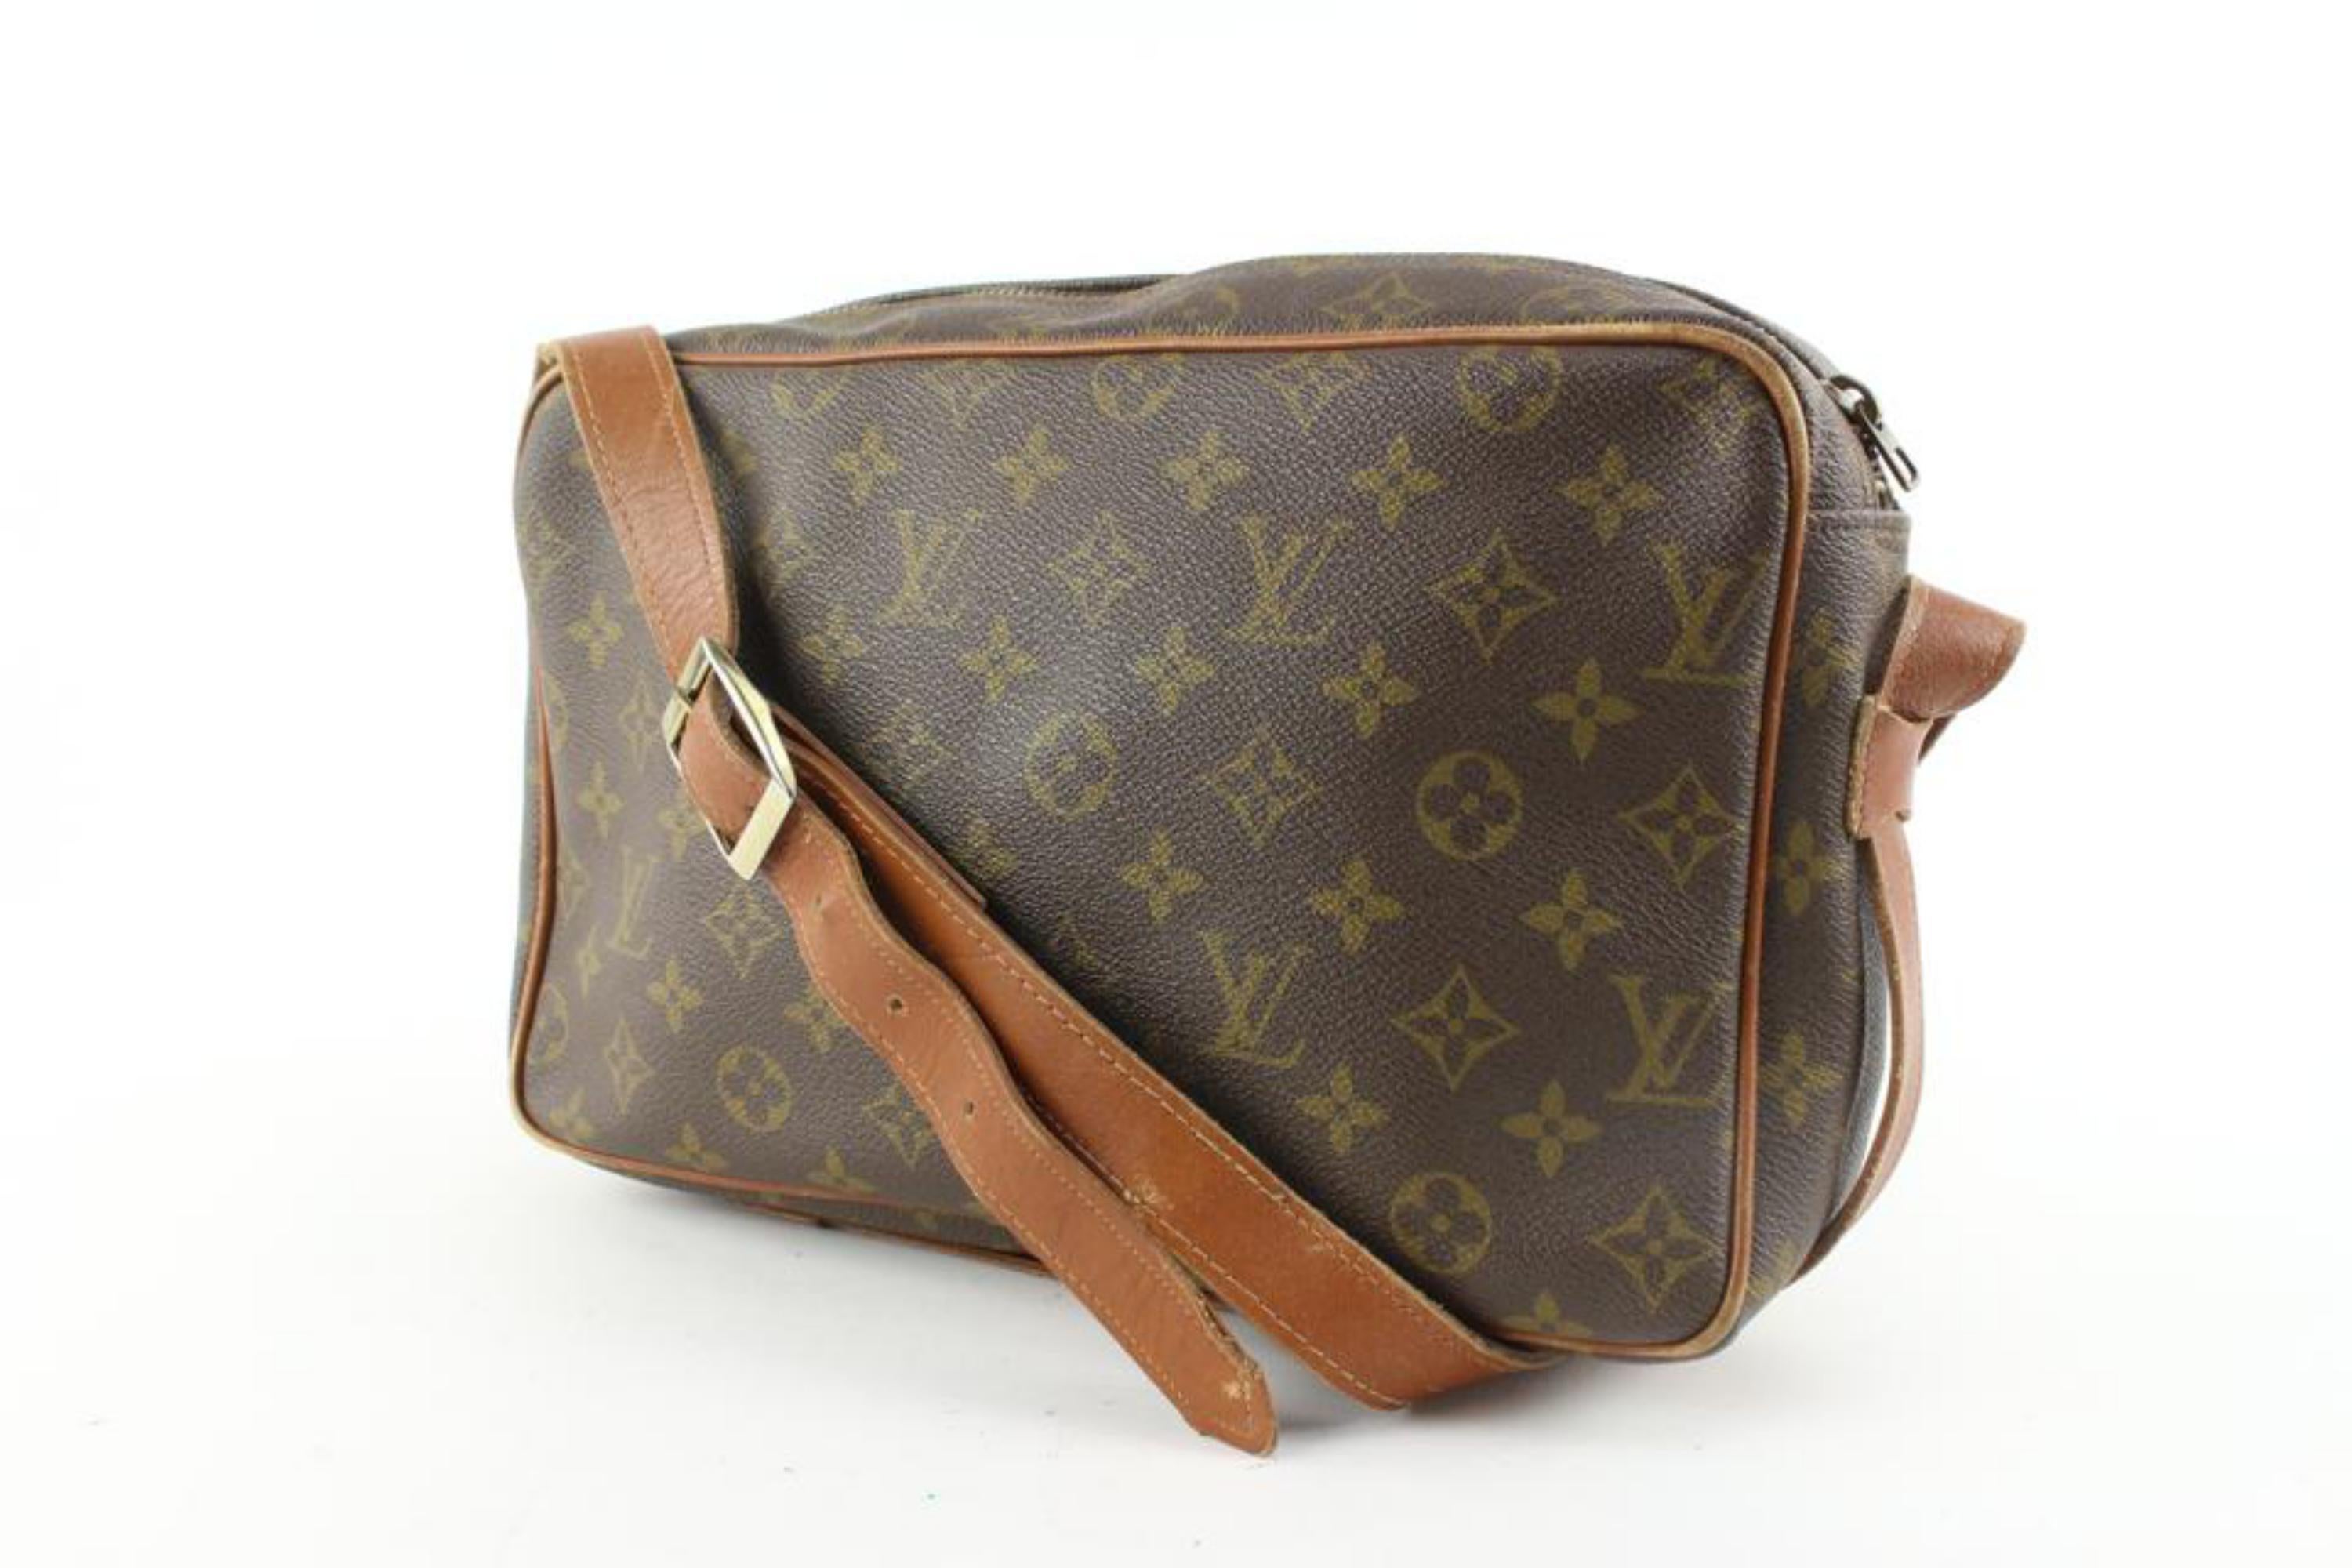 Louis Vuitton Vintage French Co Monogram Bandouliere Crossbody Bag 1222lv26
Made In: U.S.A
Measurements: Length:  11